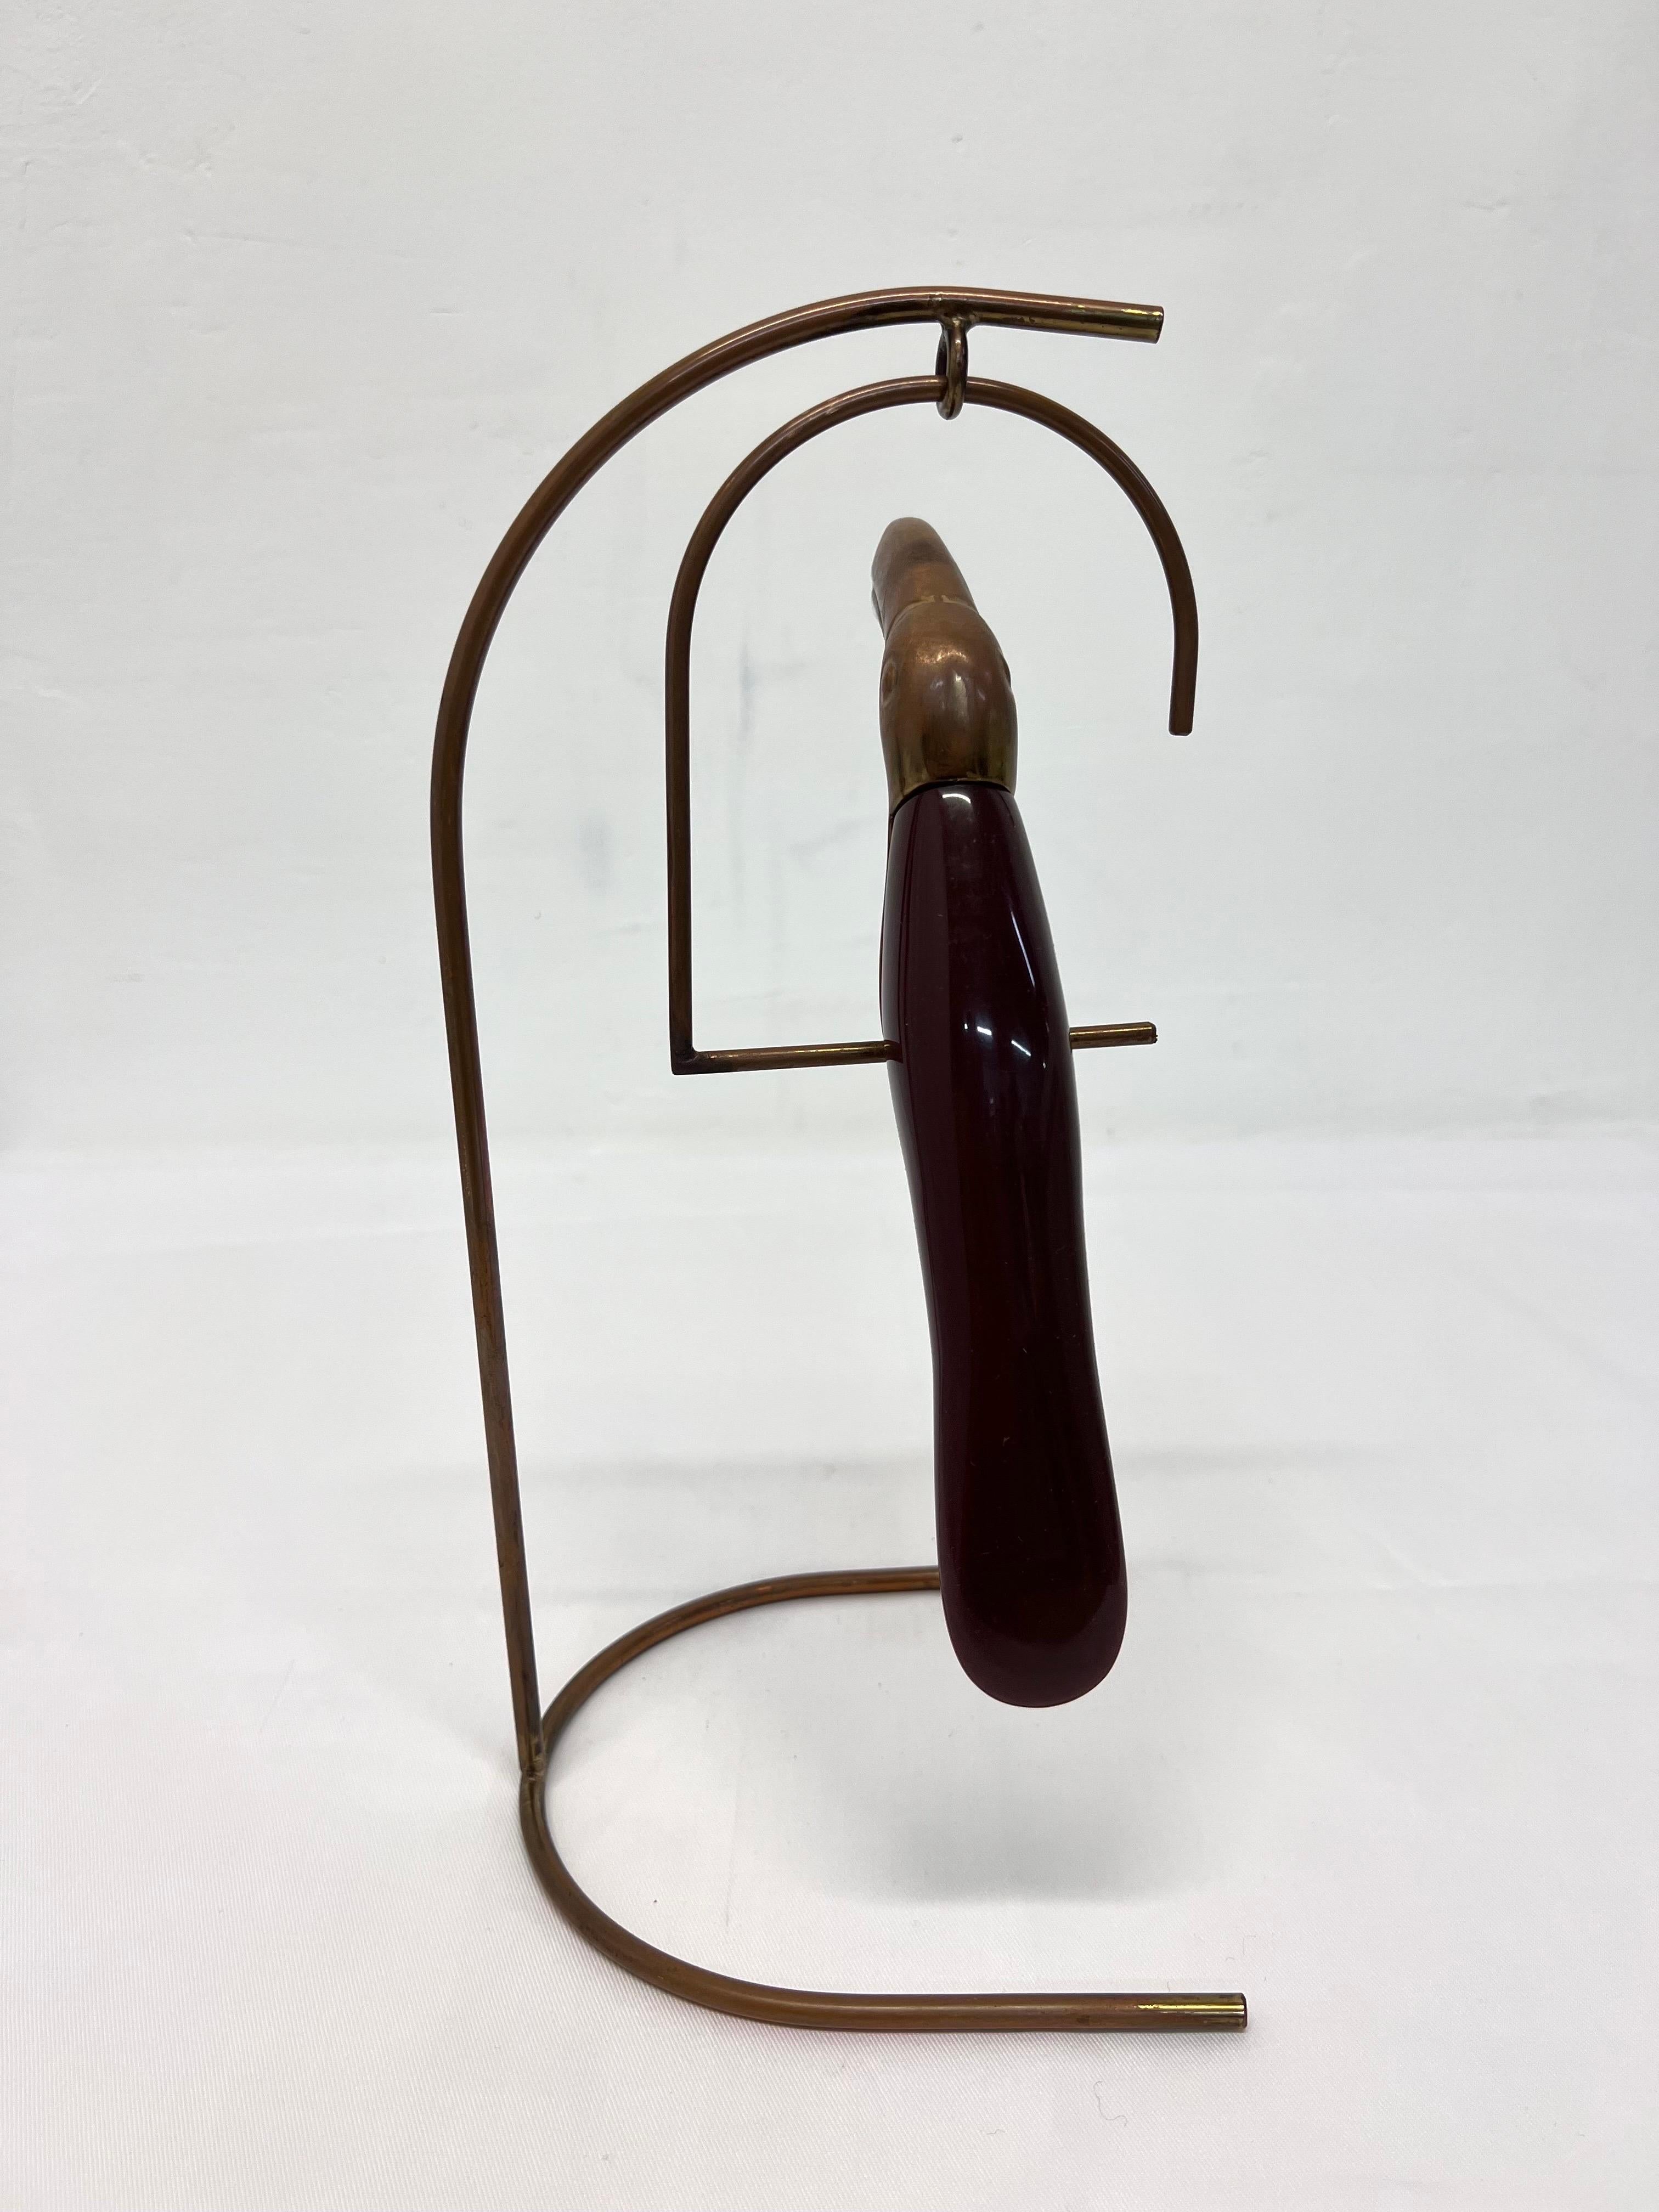 Brazilian Mid-Century Modern Brass and Resin Toucan on Stand, 1960s For Sale 2